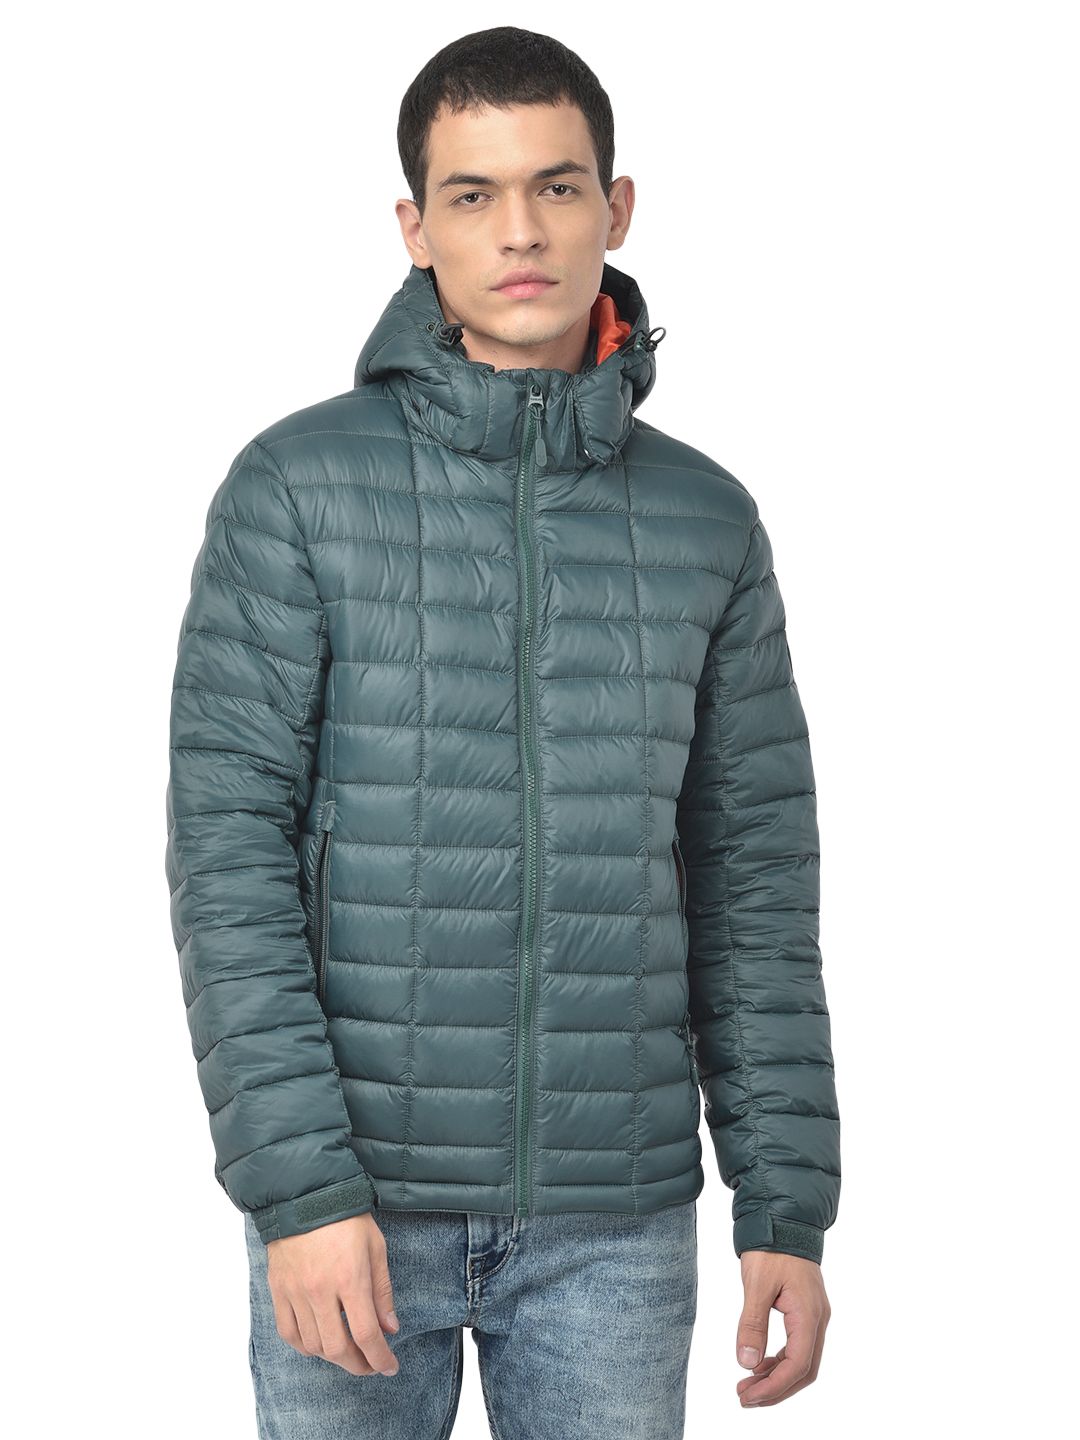 Blue atoll quilted jacket